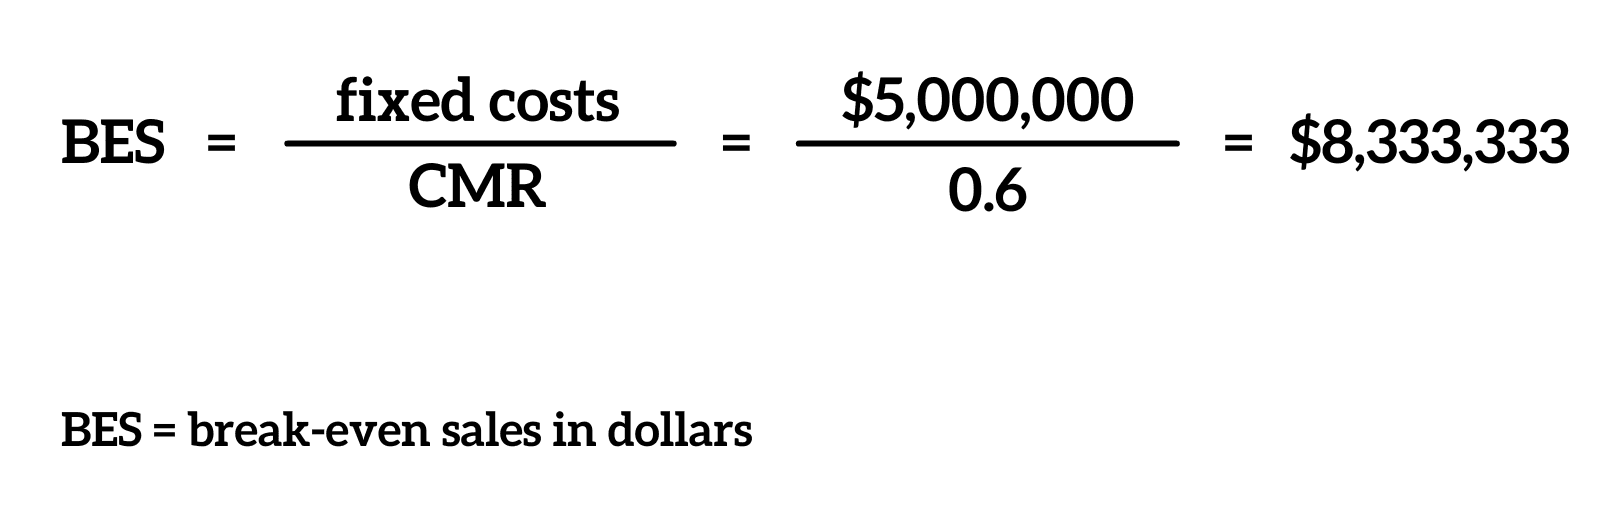 Calculation for break-even sales, which is fixed costs divided by the contribution margin ratio